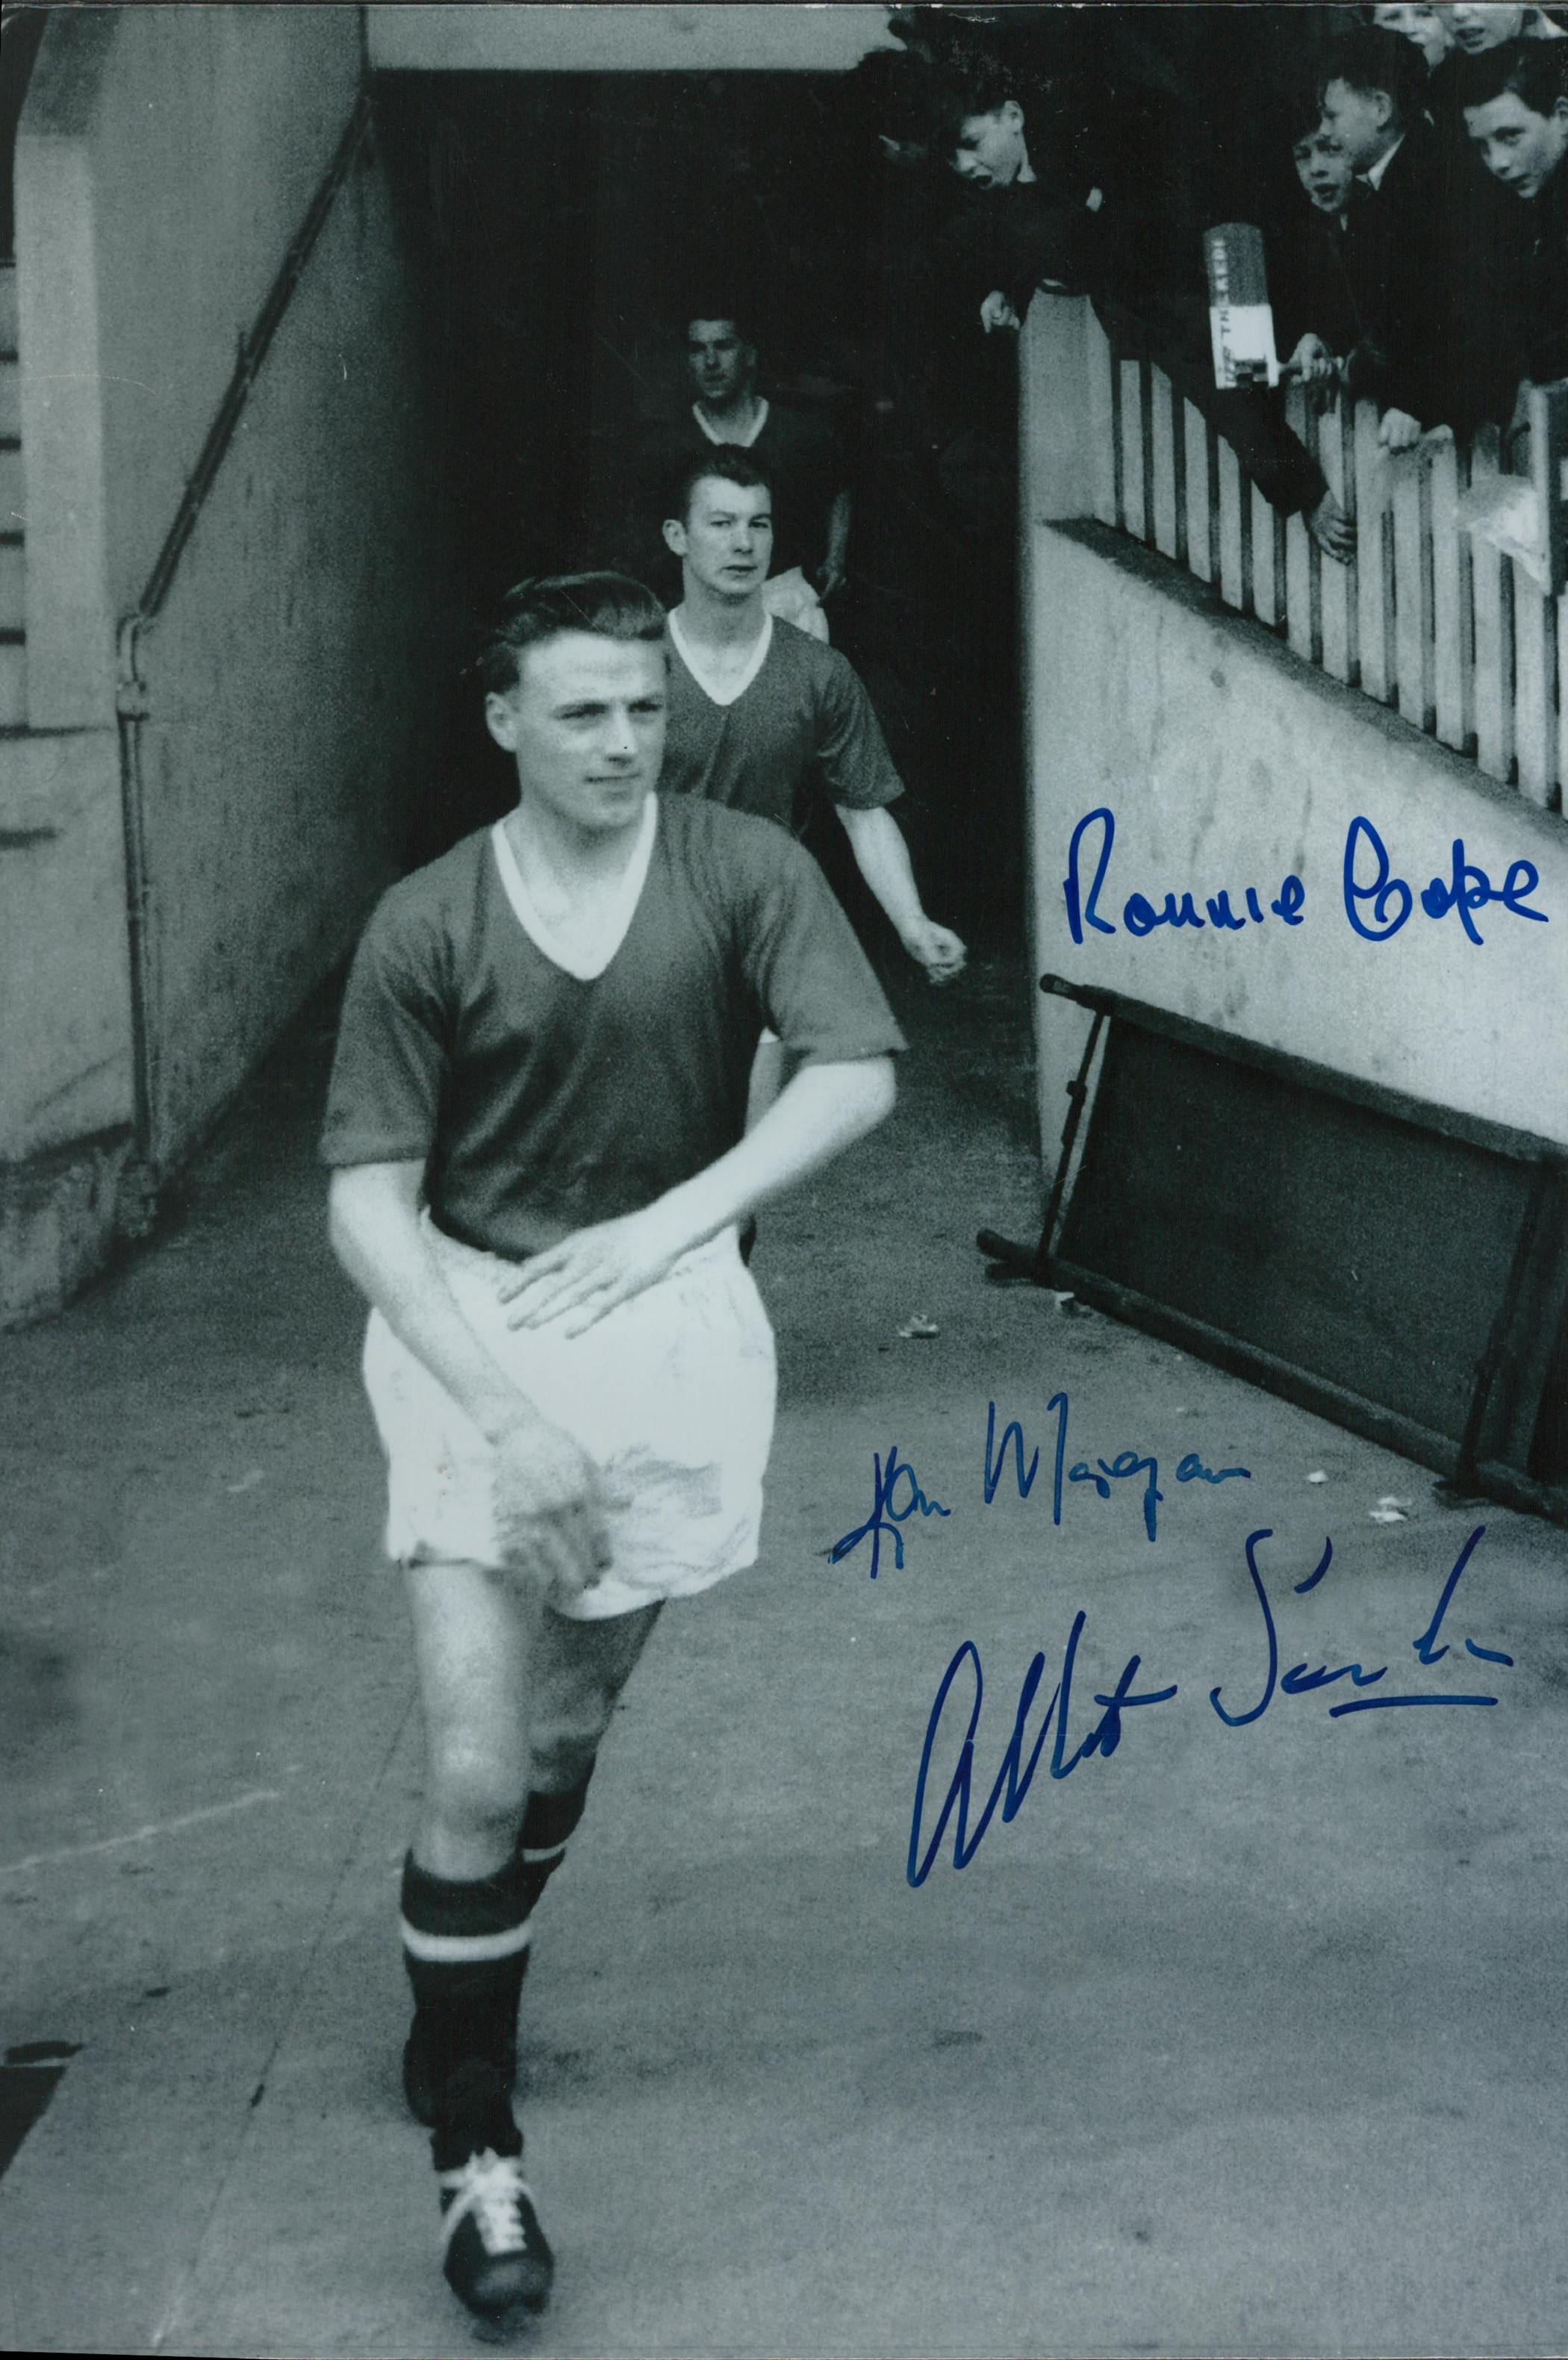 Football Man Utd legends Ronnie Cope and Ken Morgans signed 12 x 8 b/w photo. Good condition Est.